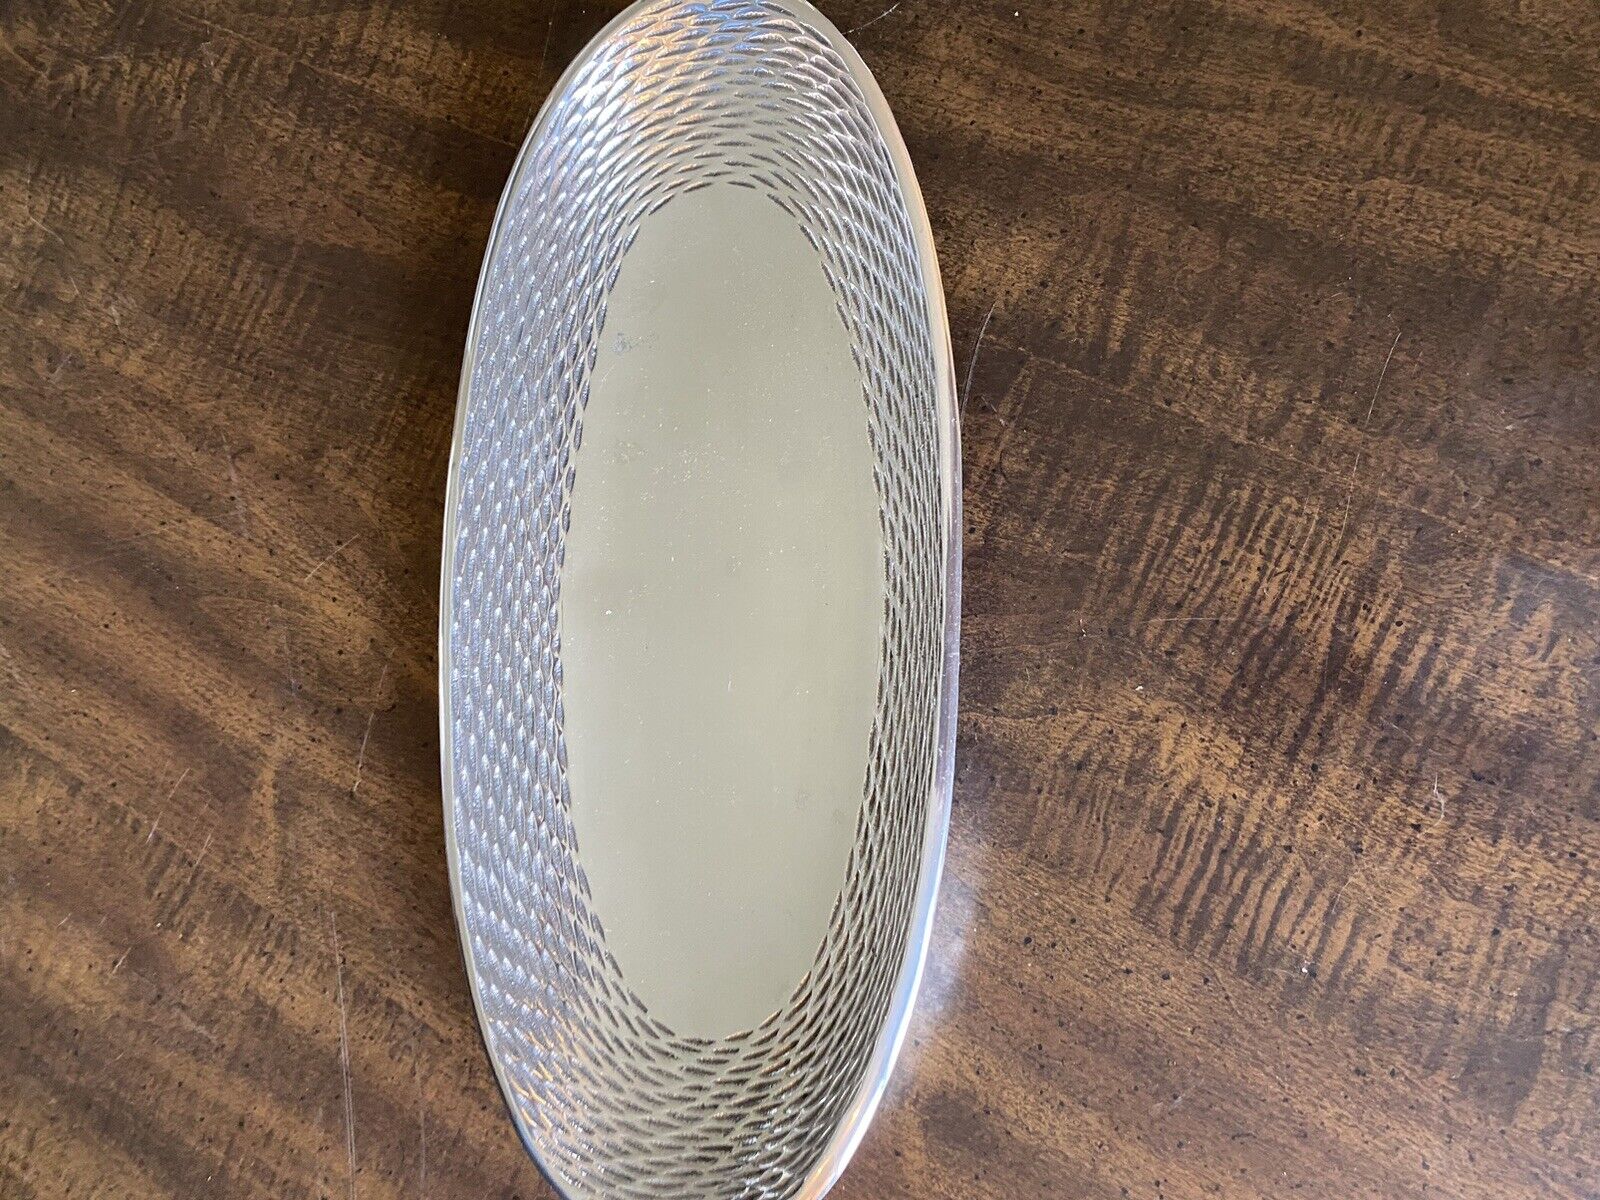 Marchesa Bread Tray with HammerAll Over in Polished Finish 6 by14 inches